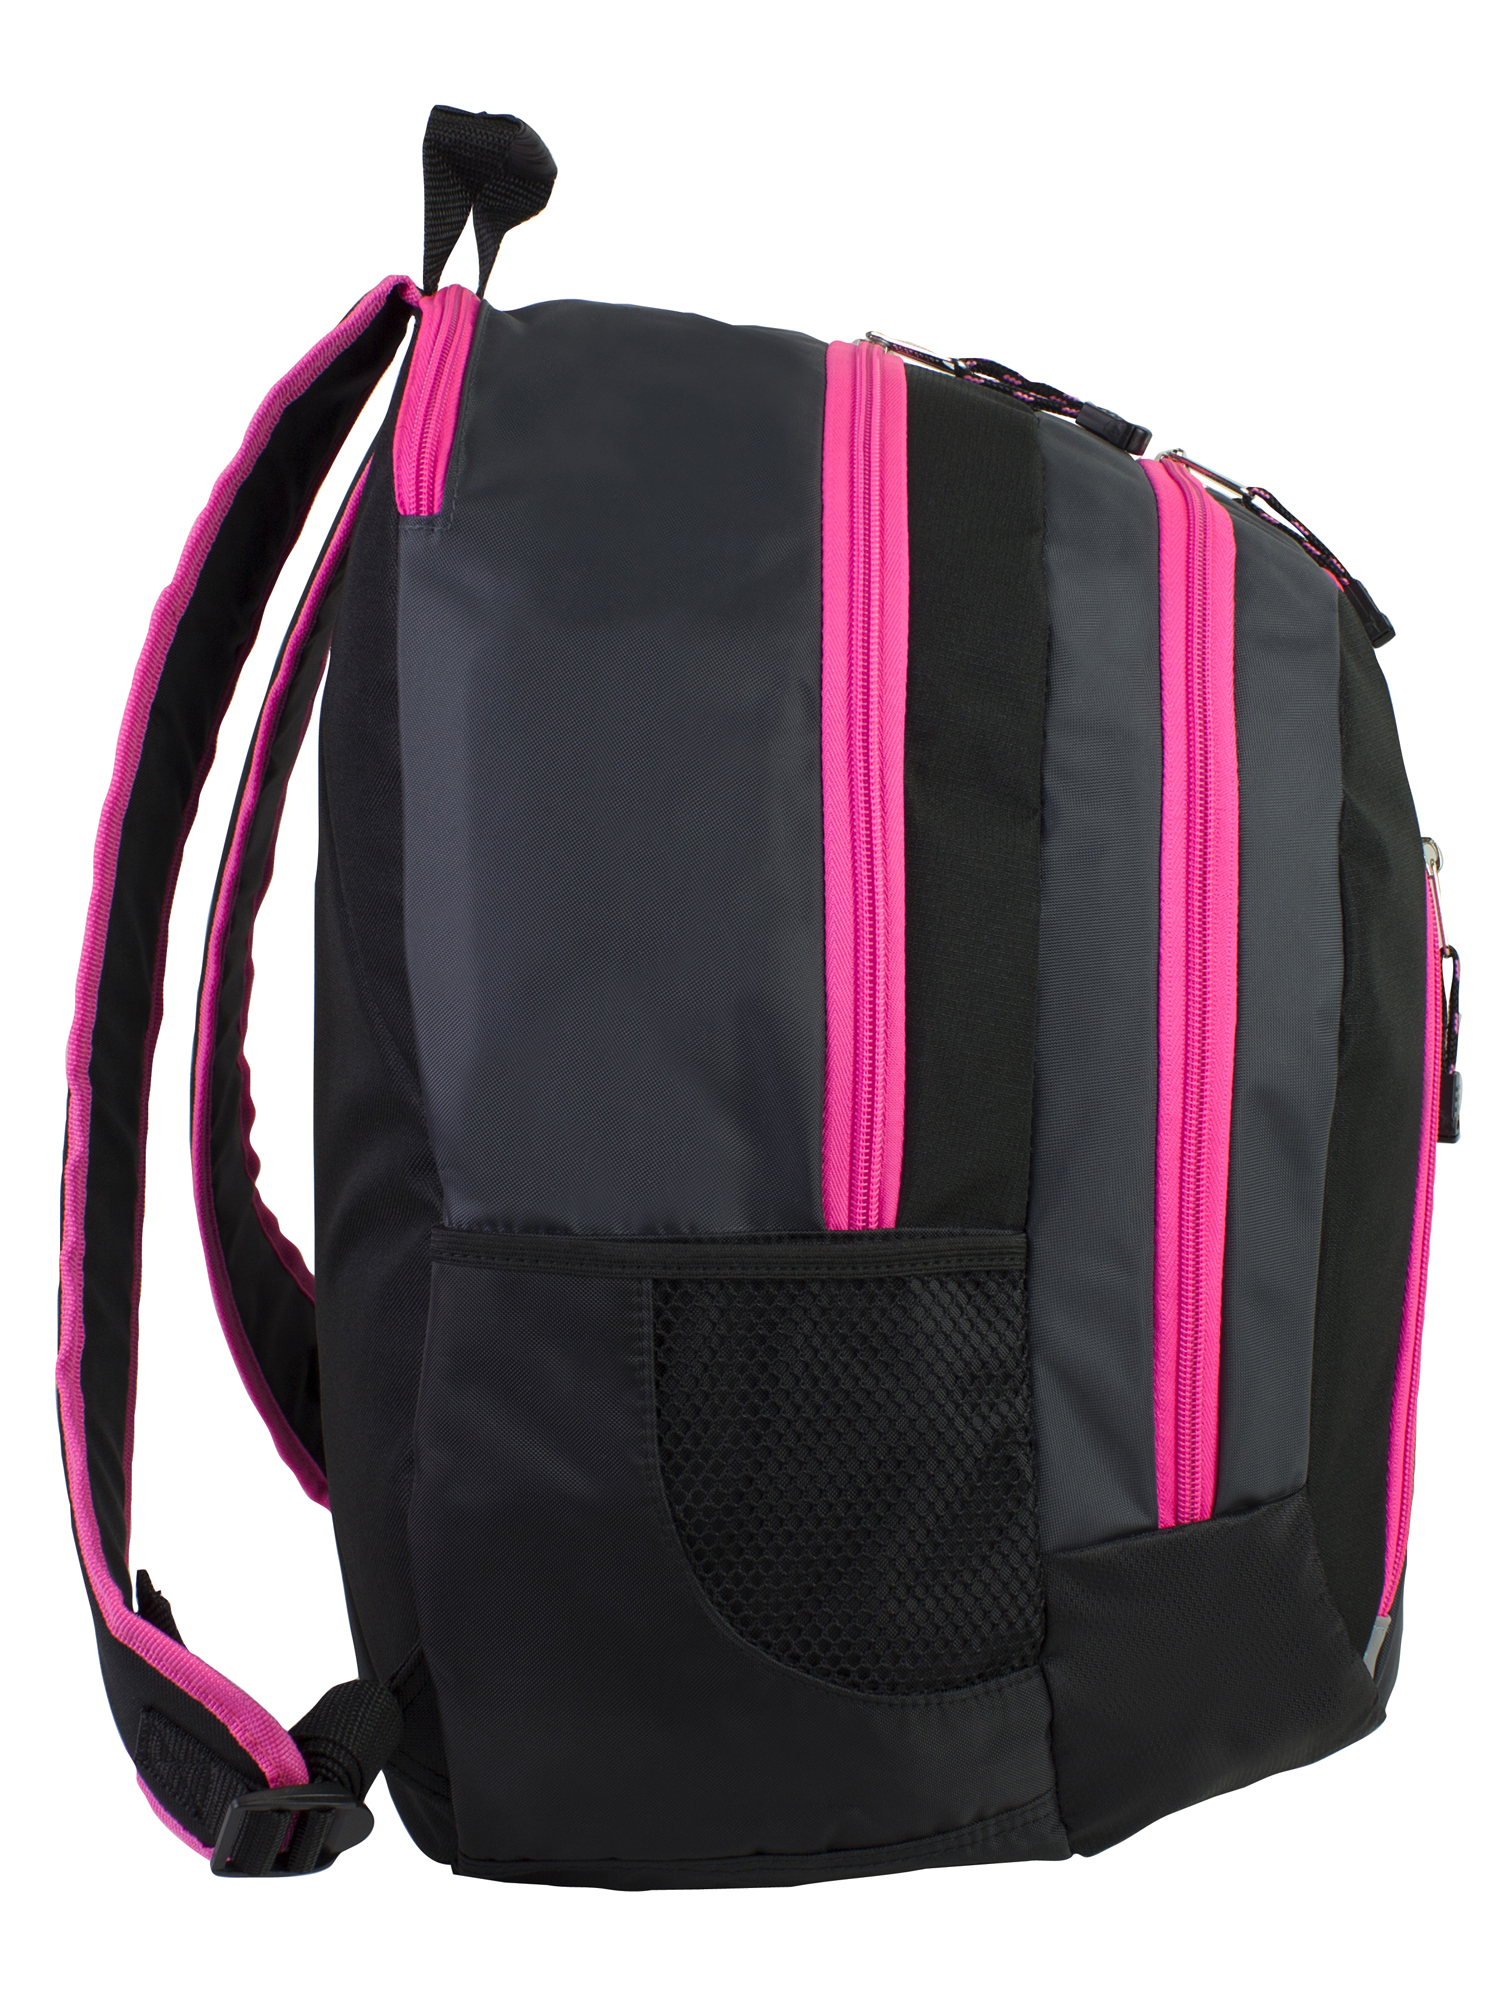 Eastsport Absolute Sport Backpack with 5 Compartments - image 3 of 4